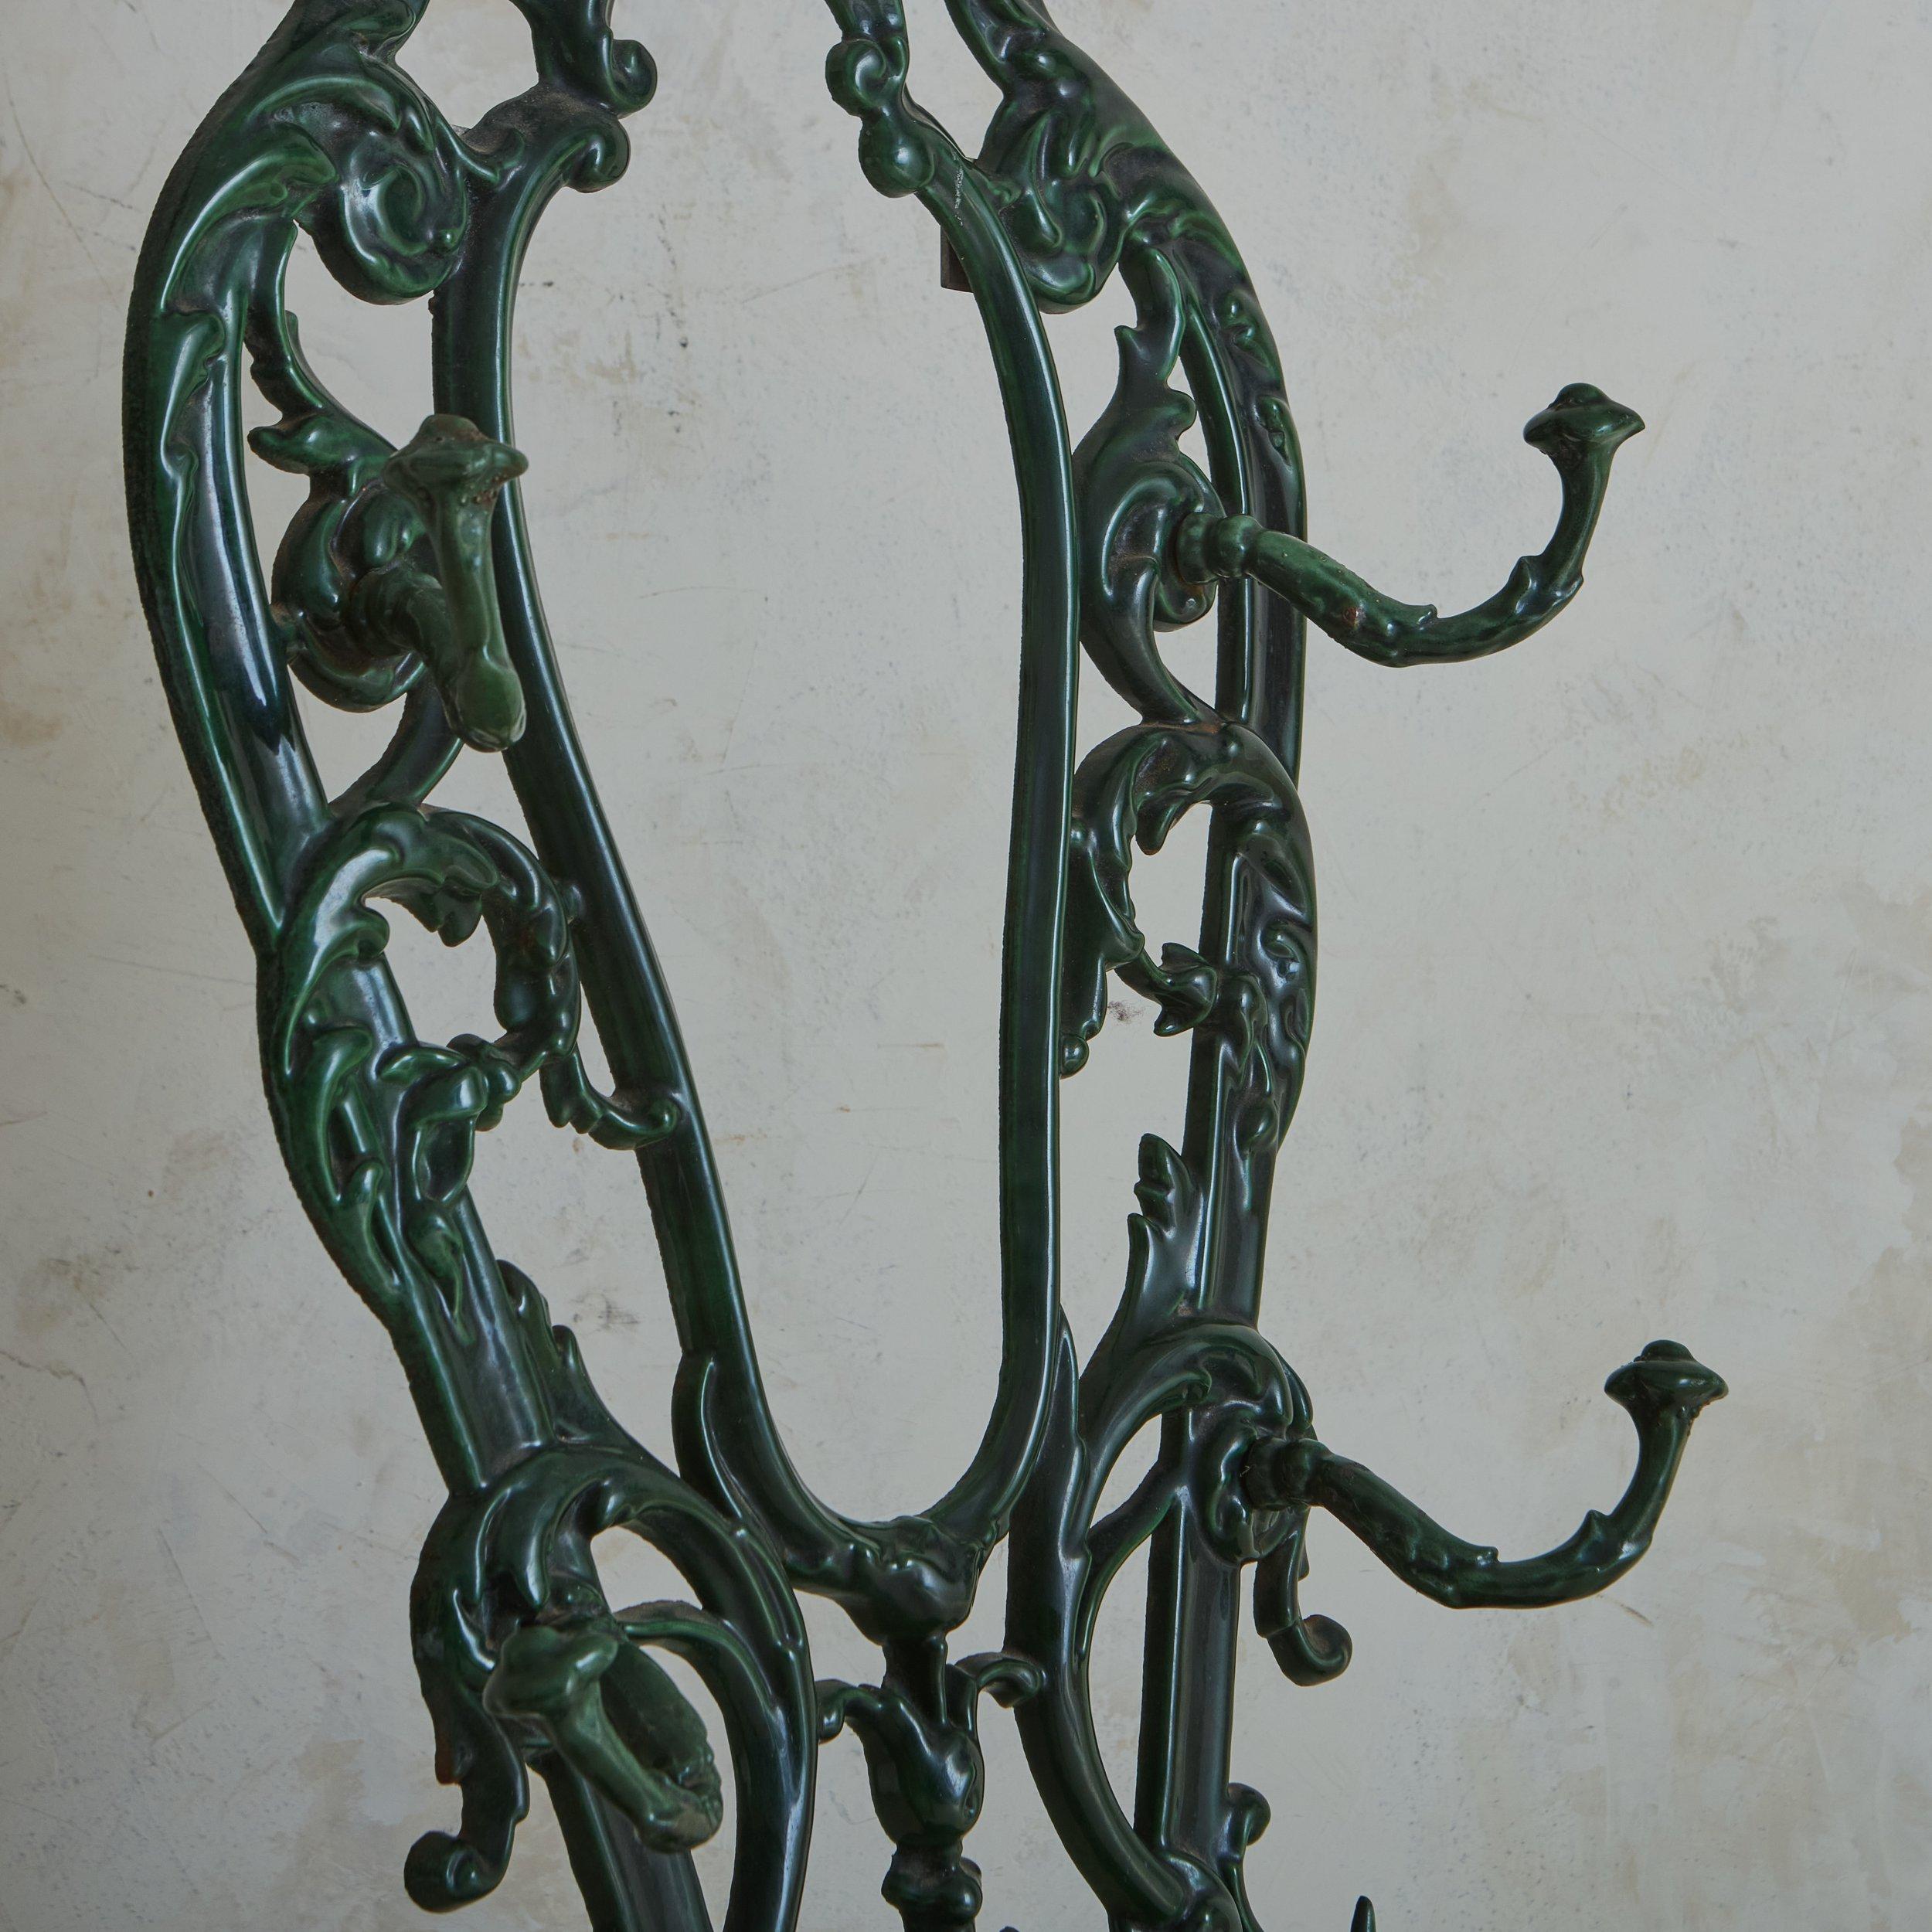 A free standing antique French cast iron coat rack or hallway tree featuring an intricate frame with curl and scroll motifs. This piece was painted a vibrant green hue; it has a demilune table top and six hooks for hanging coats or hats. The lower